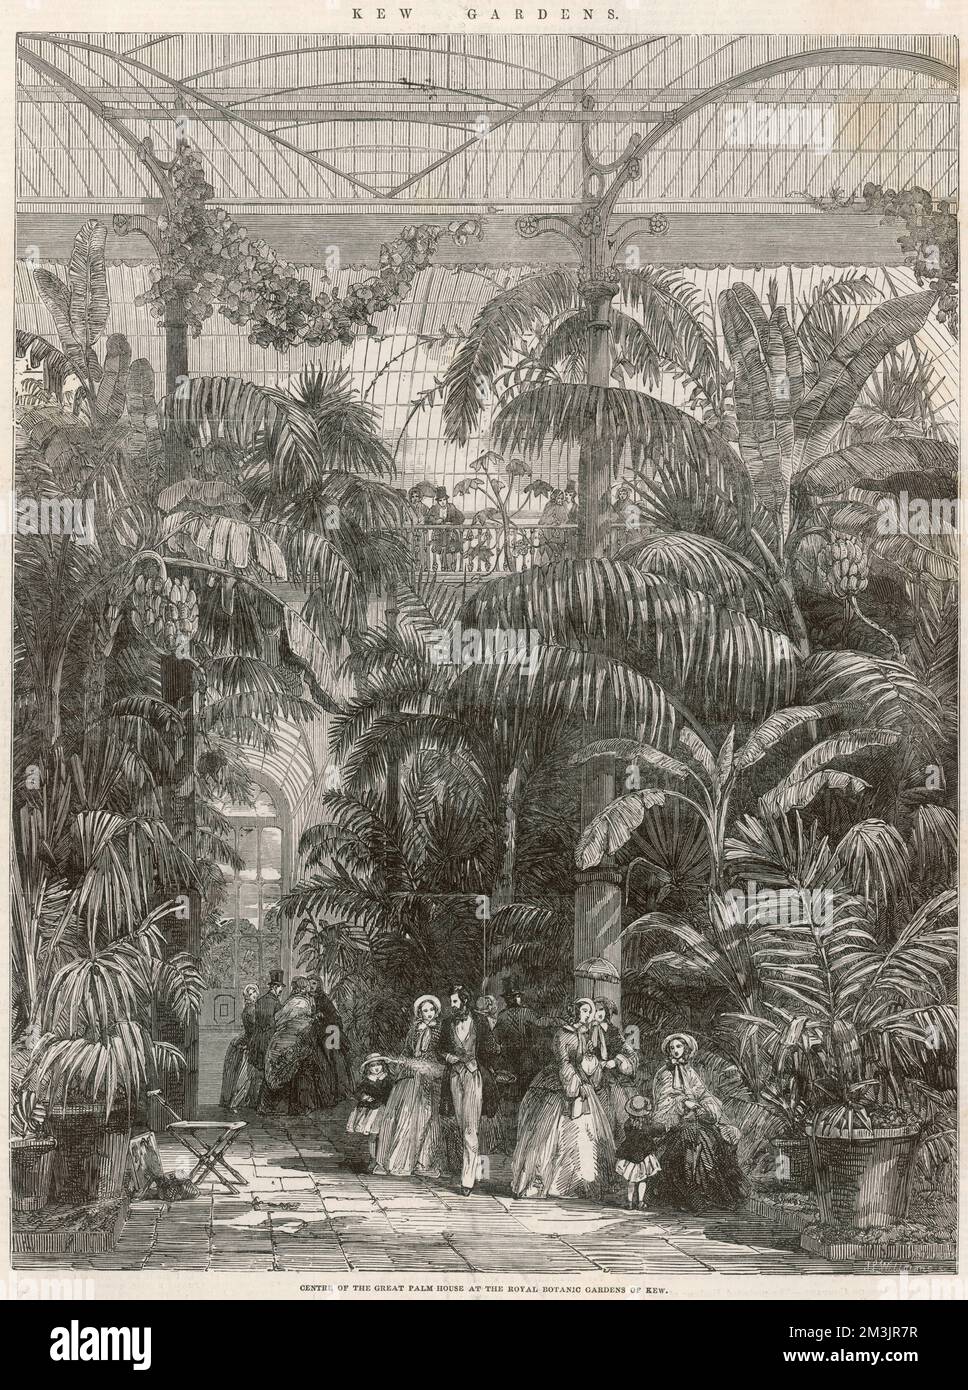 Interior of the Palm House at Kew Gardens in 1852. Built by the Irish engineer, Richard Turner and architect, Decimus Burton between 1844-1848, the glasshouse was an extraordinary feat of engineering and remains today an iconic building and the world's most important surviving Victorian glass and iron structure.  1852 Stock Photo